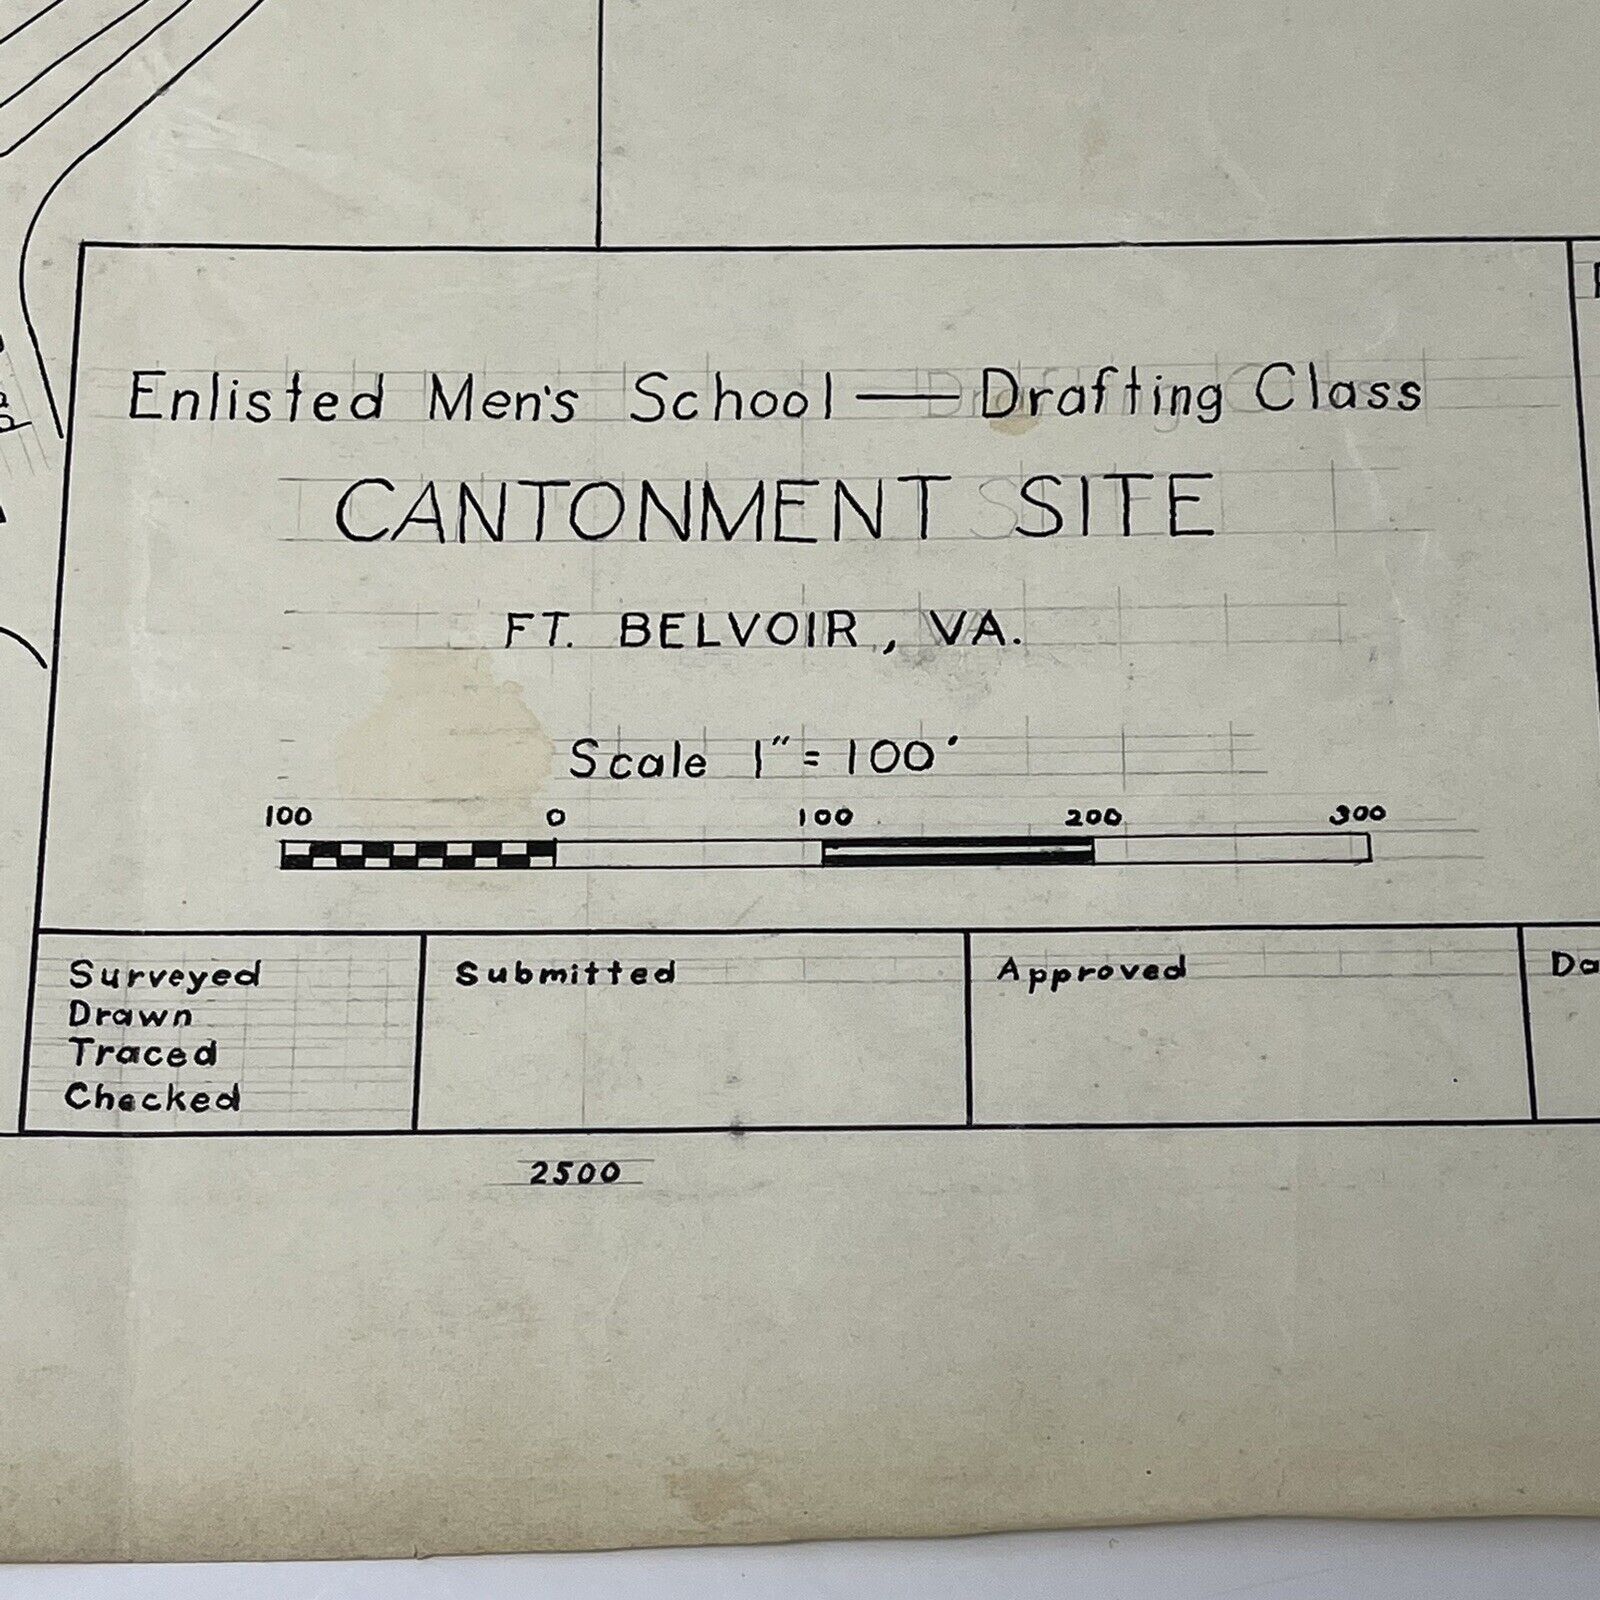 1943 Fort Belvoir VA Enlisted Men's School Drafting Class Hand Drawn Camp Map FT